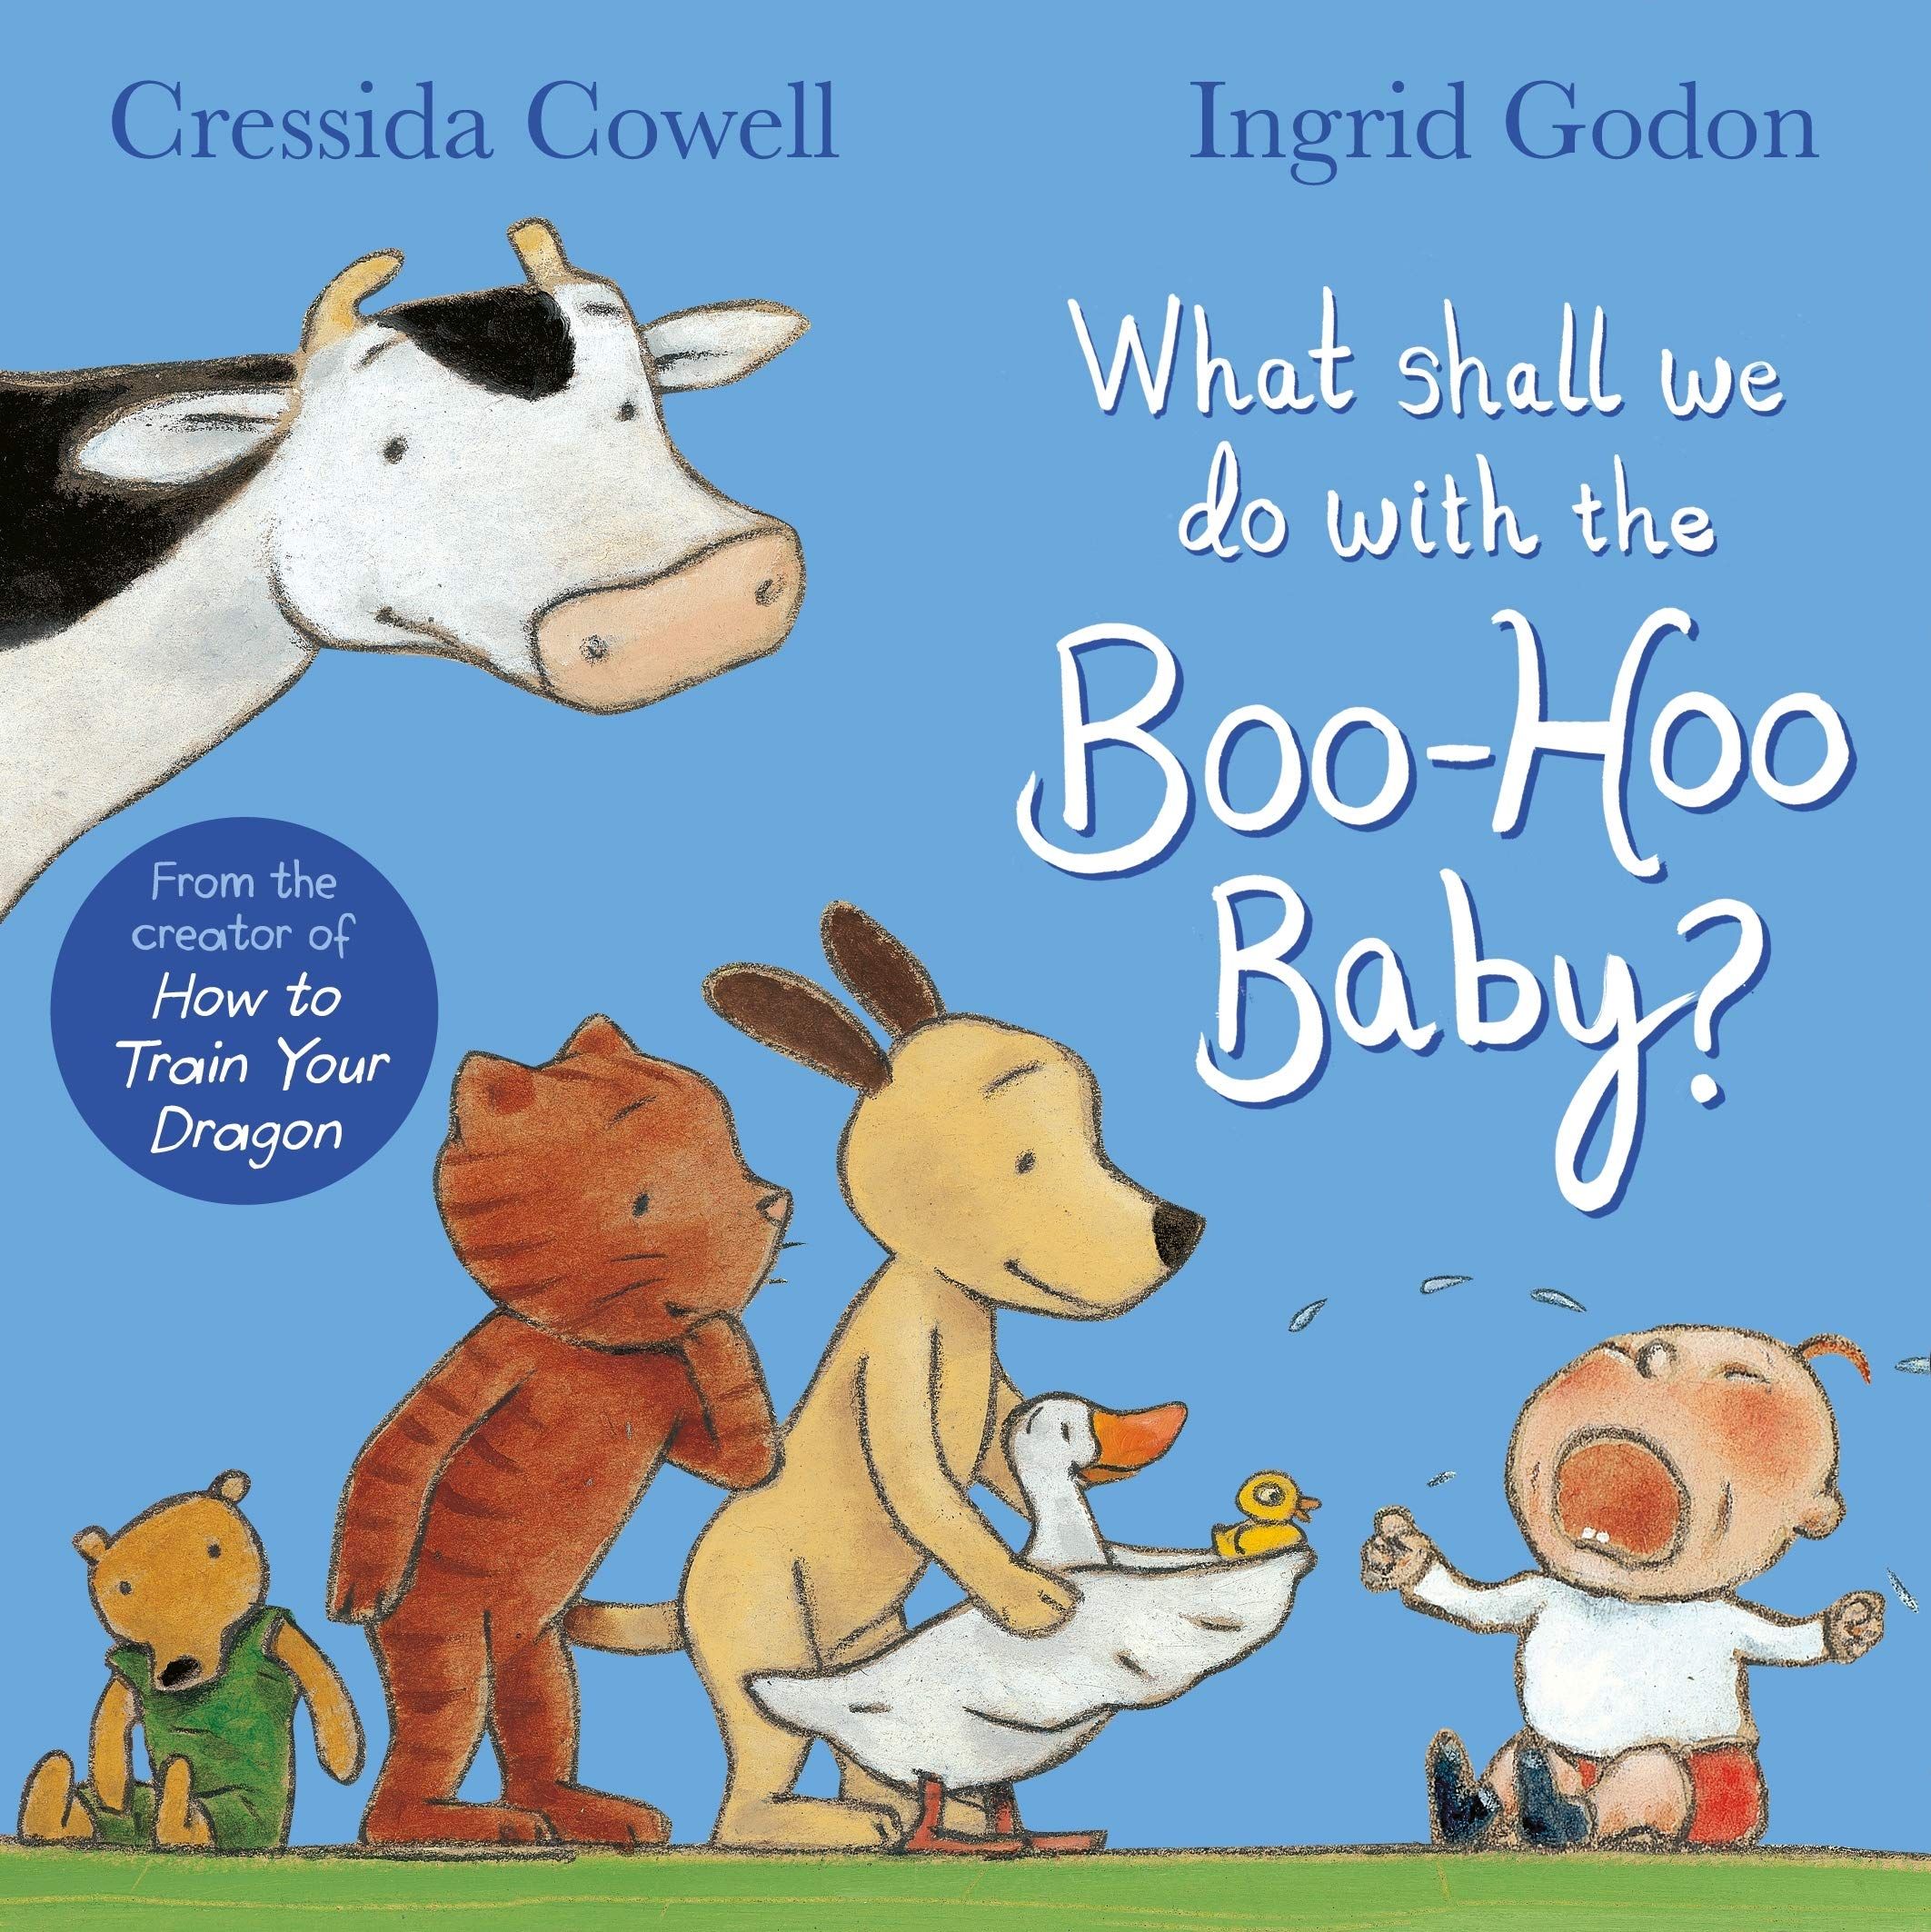 the cover of What Shall We Do With the Boo-Hoo Baby?